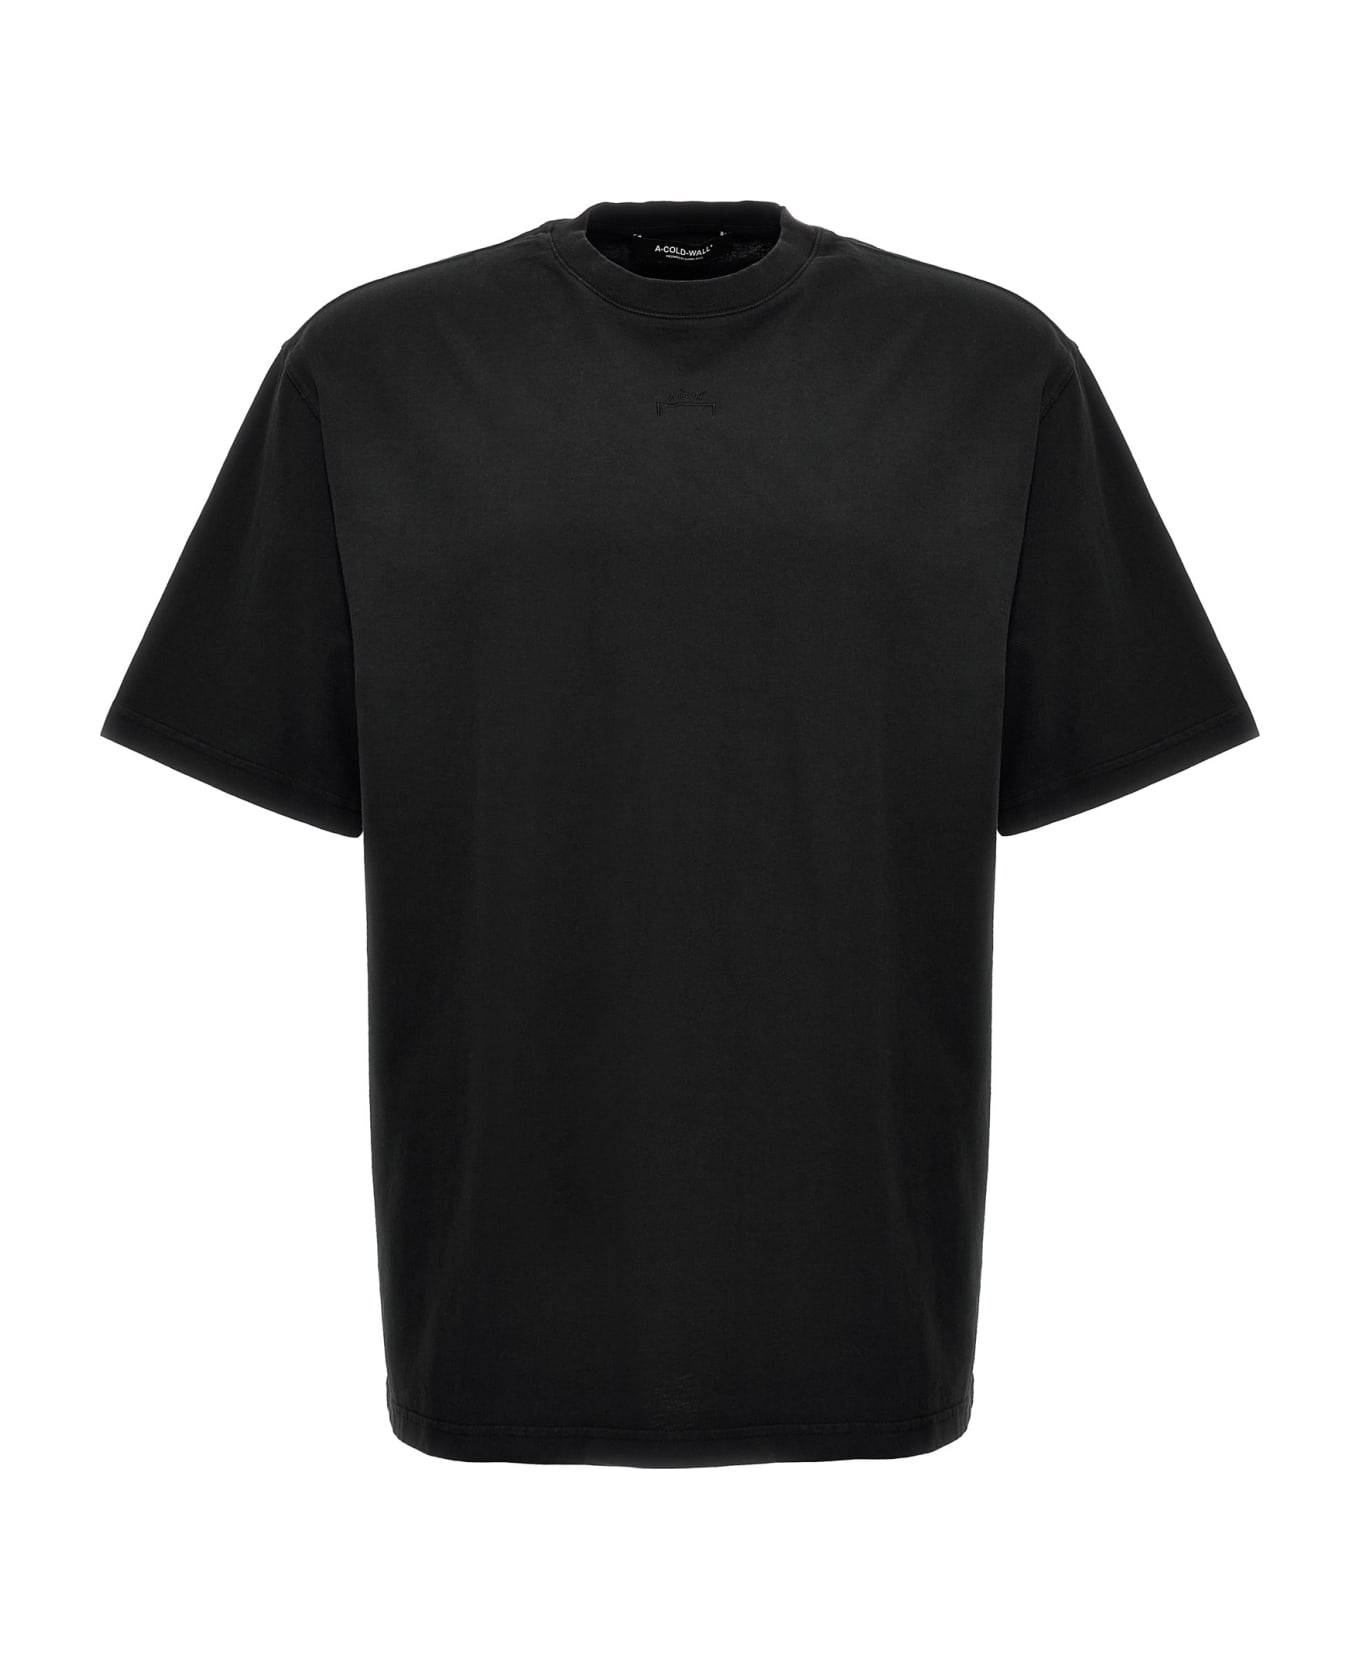 A-COLD-WALL 'essential' T-shirt - BLACK シャツ